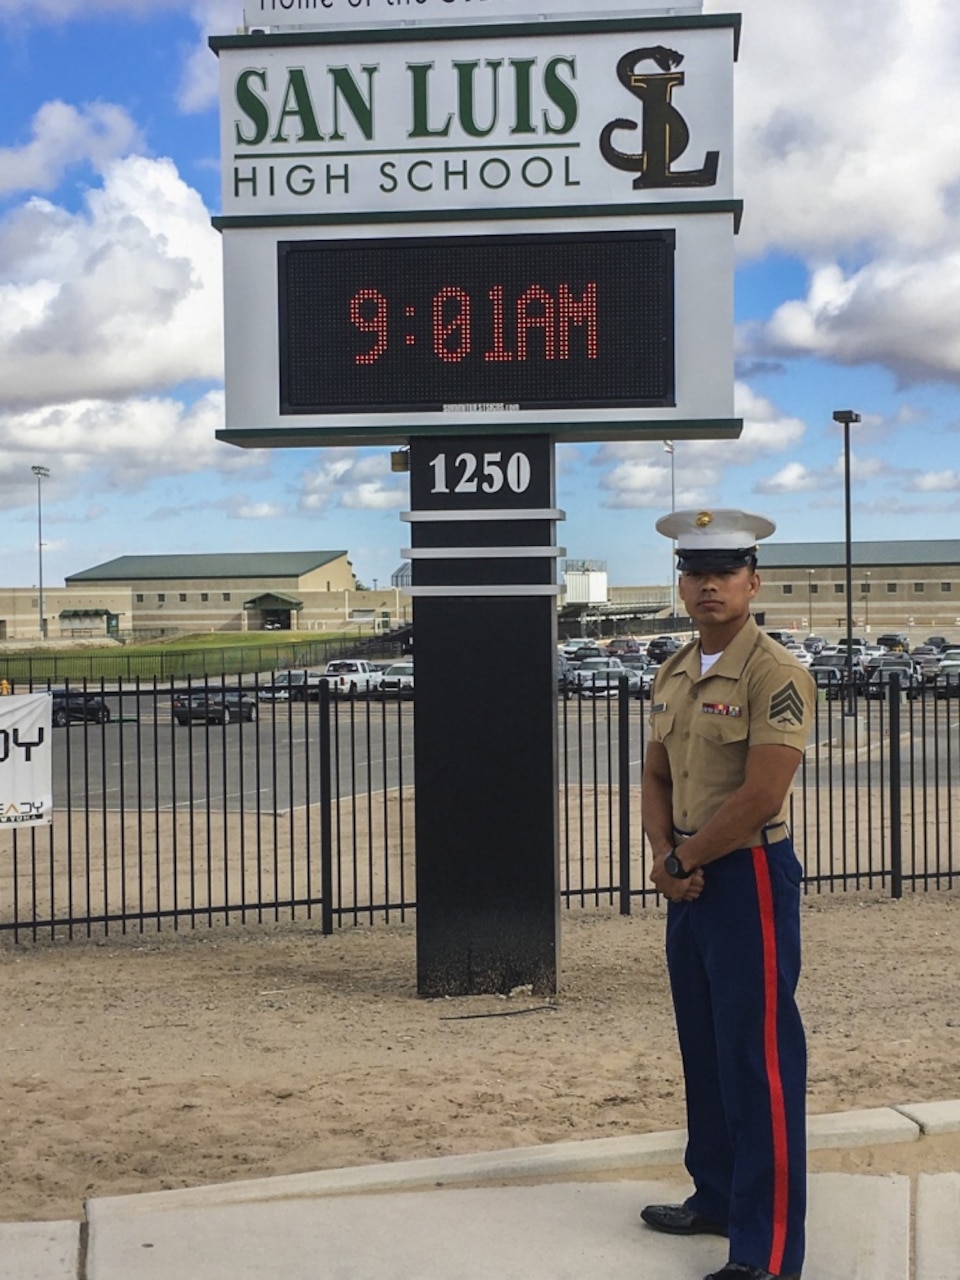 Sergeant Edwin Carranza, a canvassing recruiter with Recruiting Station Phoenix, poses in front of San Luis High School in San Luis, Ariz., Sept. 20 2018. Carranza attended this high school and has returned as a canvassing recruiter with Recruiting Station Phoenix. (U.S. Marine Corps photo by Sgt. Alvin Pujols)